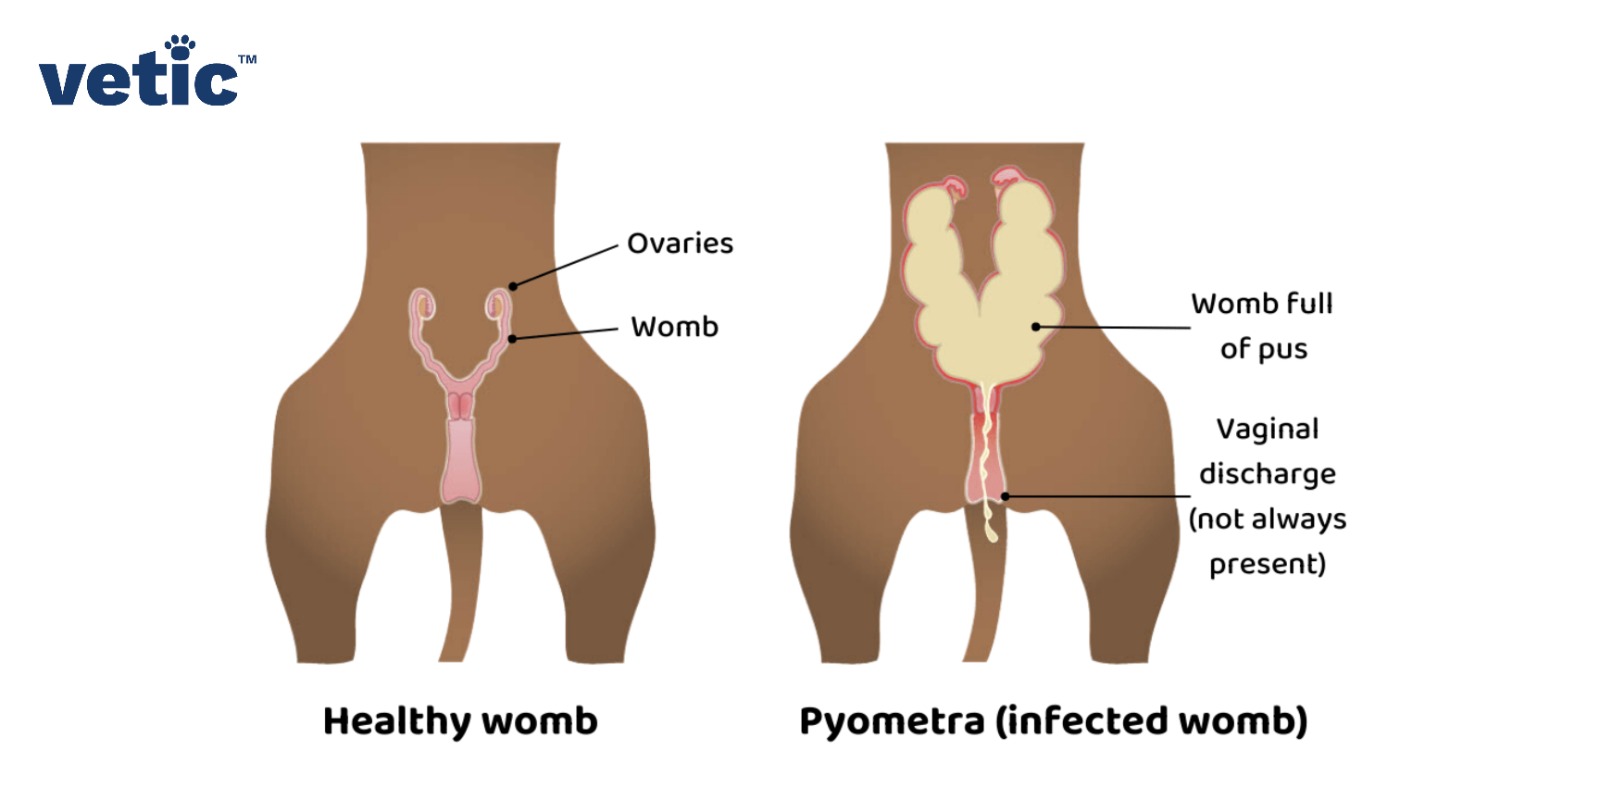 Pyometra in dogs: comparison of a healthy womb with the ovaries and womb clearly marketd. the infected womb has pus and vaginal discharge.